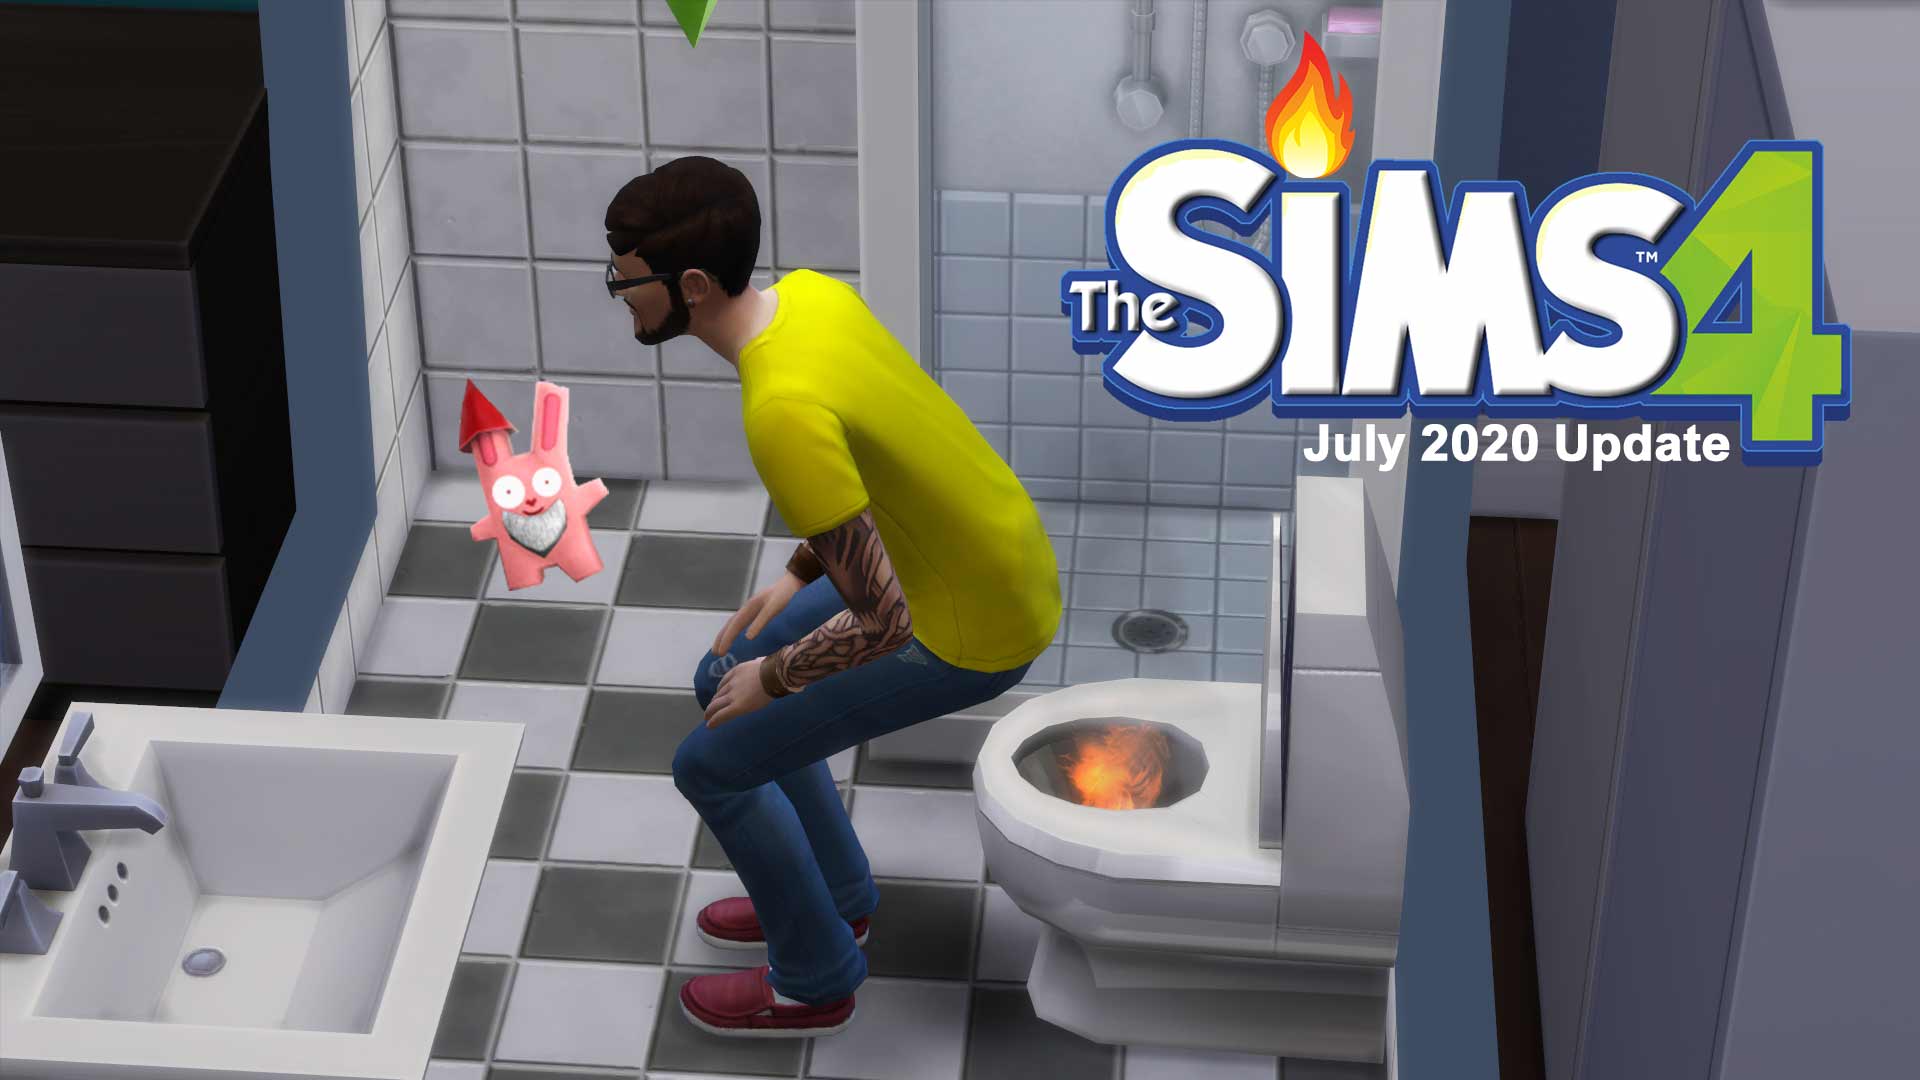 Sims 4 free download 2020 exe